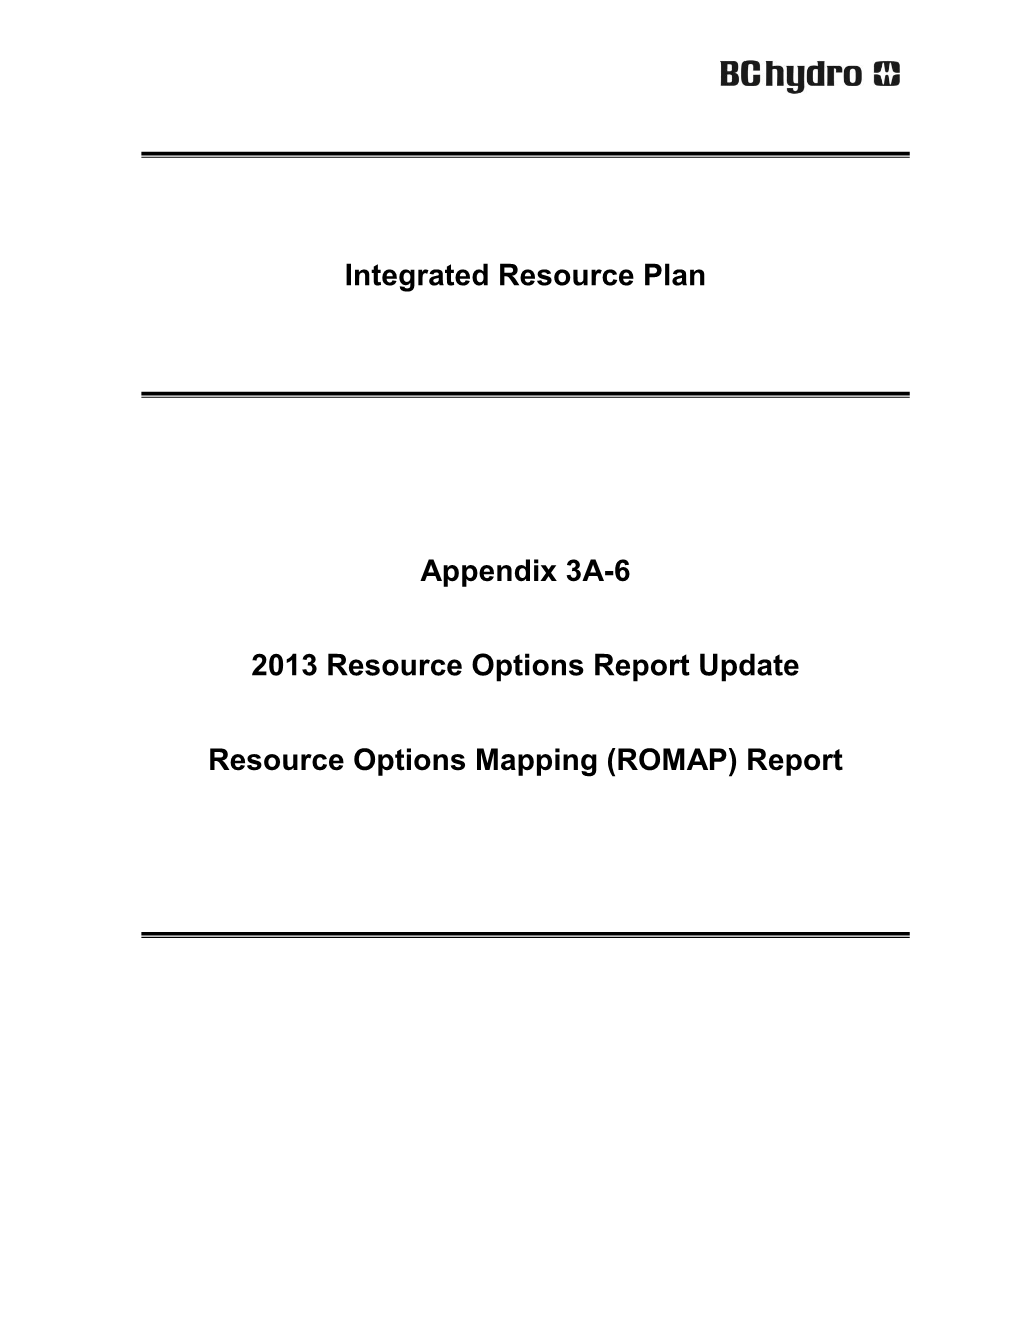 Resource Options Mapping (ROMAP) Report